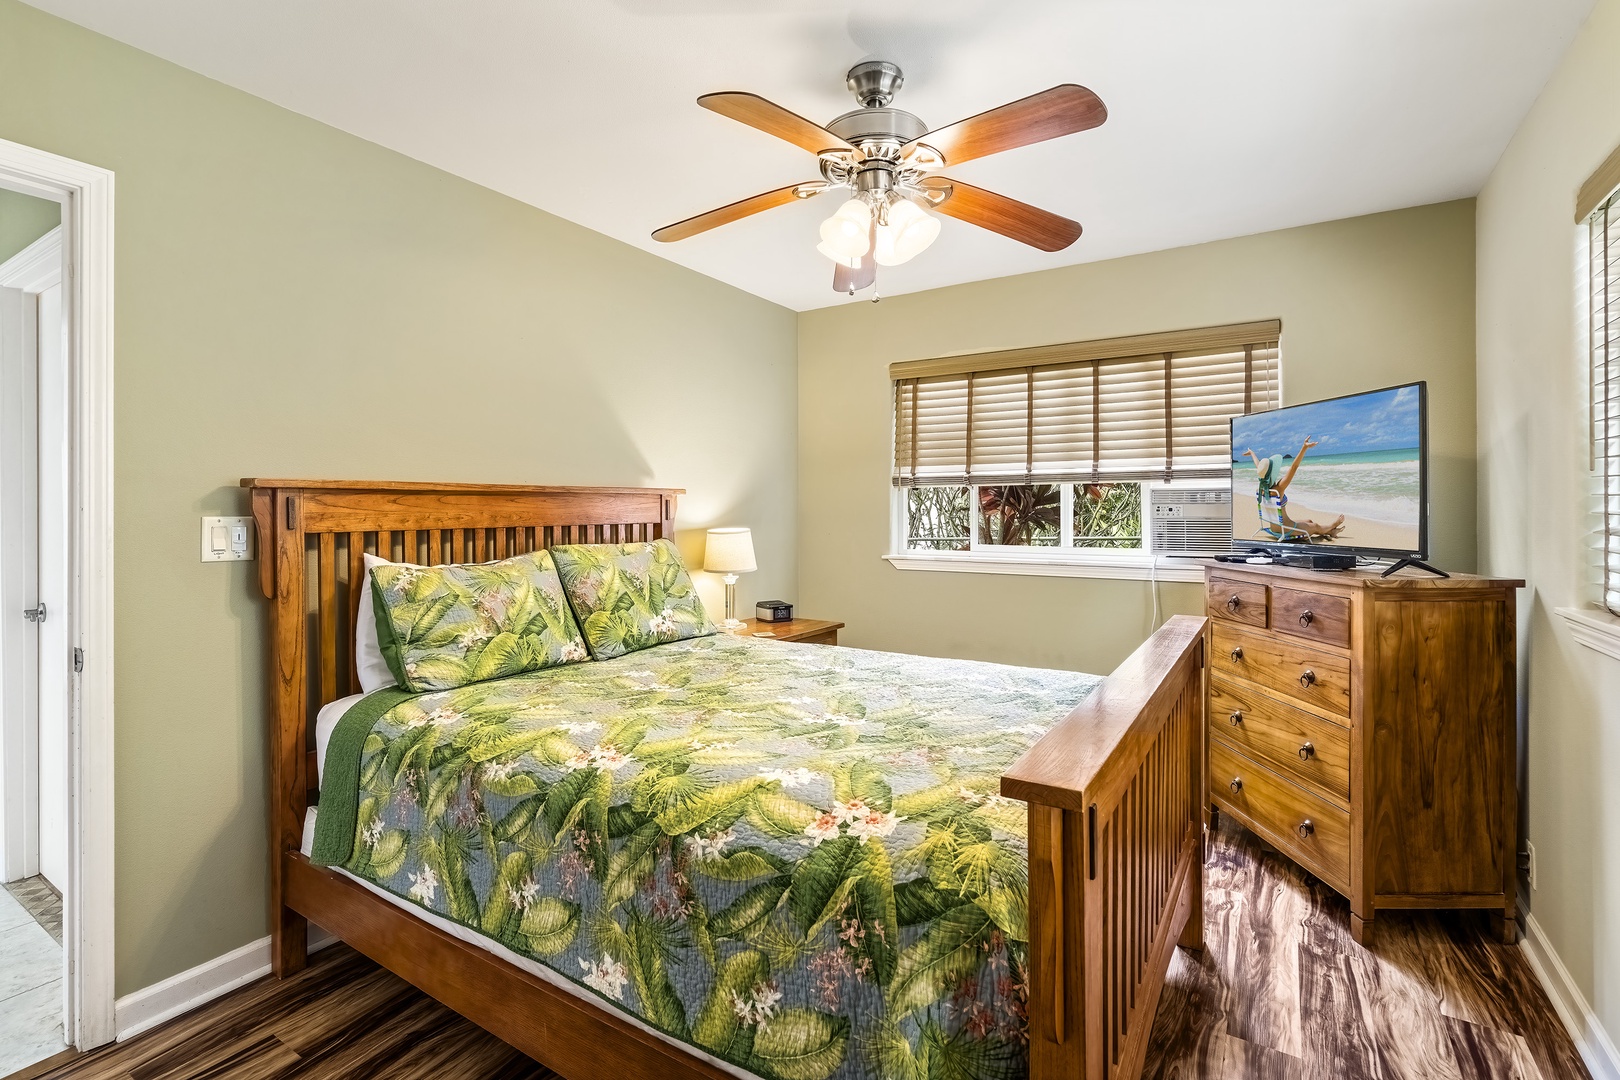 Kailua Kona Vacation Rentals, Honu O Kai (Turtle of the Sea) - Bedroom at ground level equipped with A/C and Queen bed